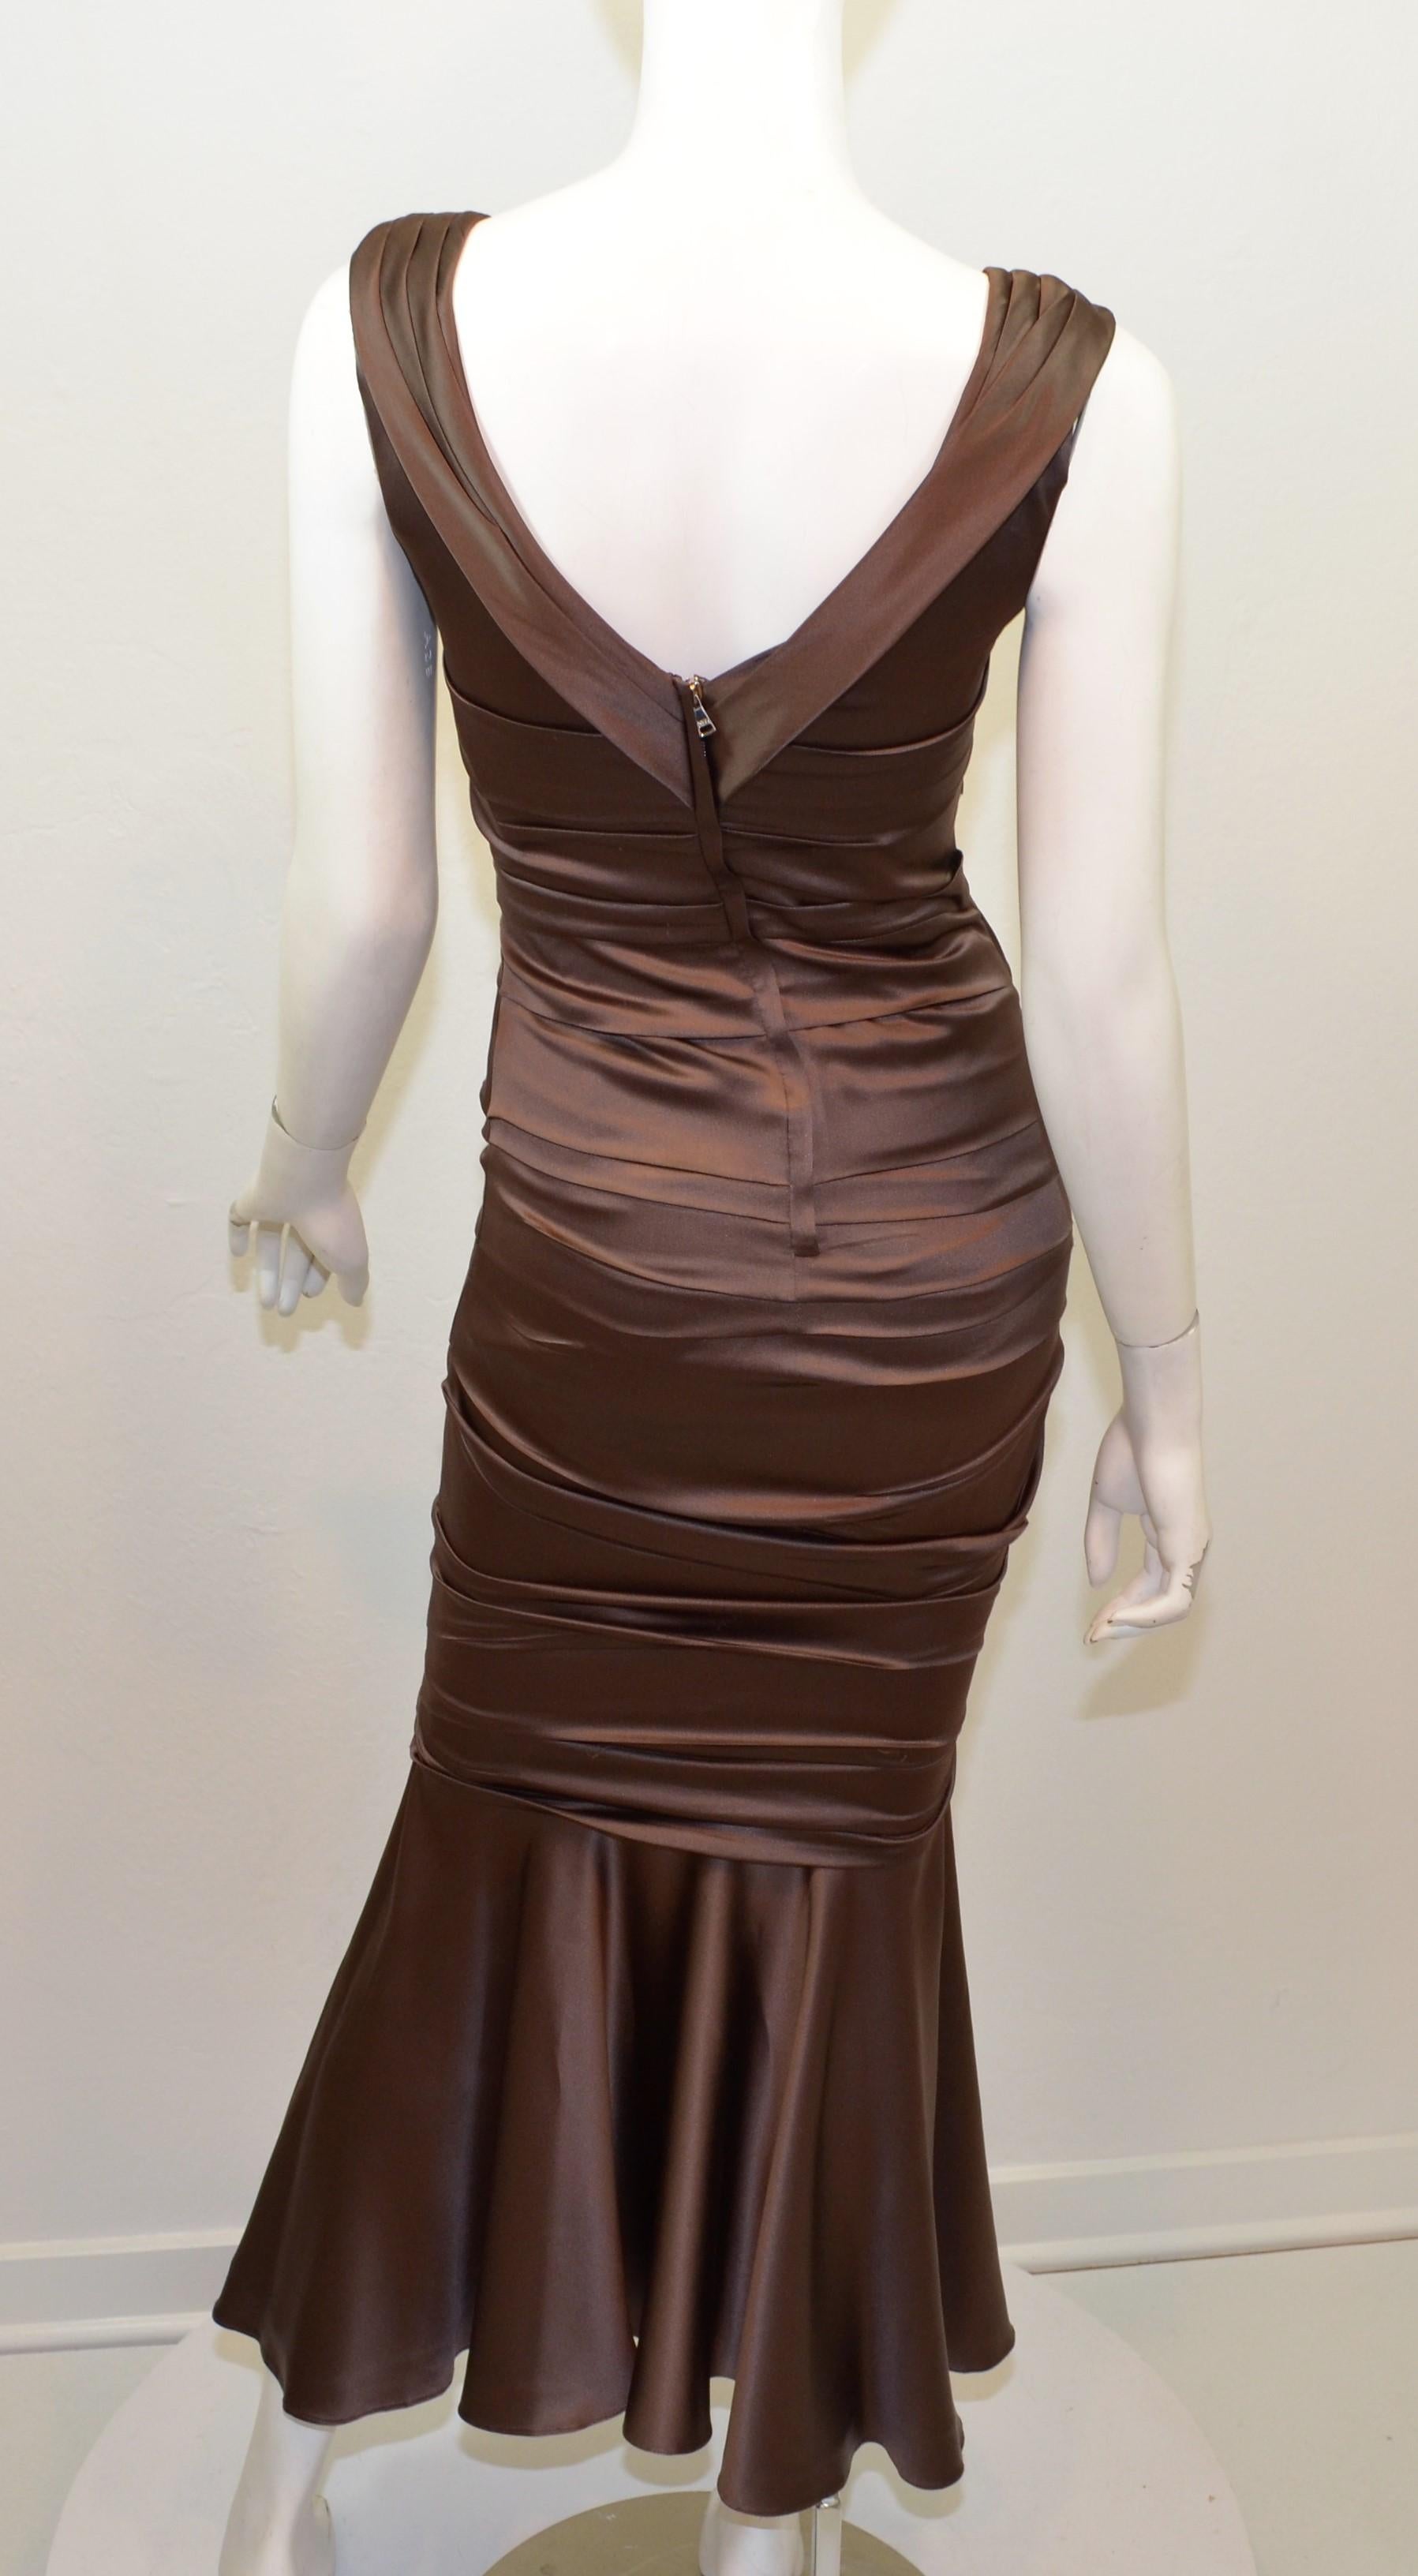 Dolce & Gabbana Brown Ruched Dress -- features a gathered design with a fluted hem. Dress has a back zipper closure and is fully lined.

Measurements:
Bust 33”, waist 26”, hips 32”, length 45”